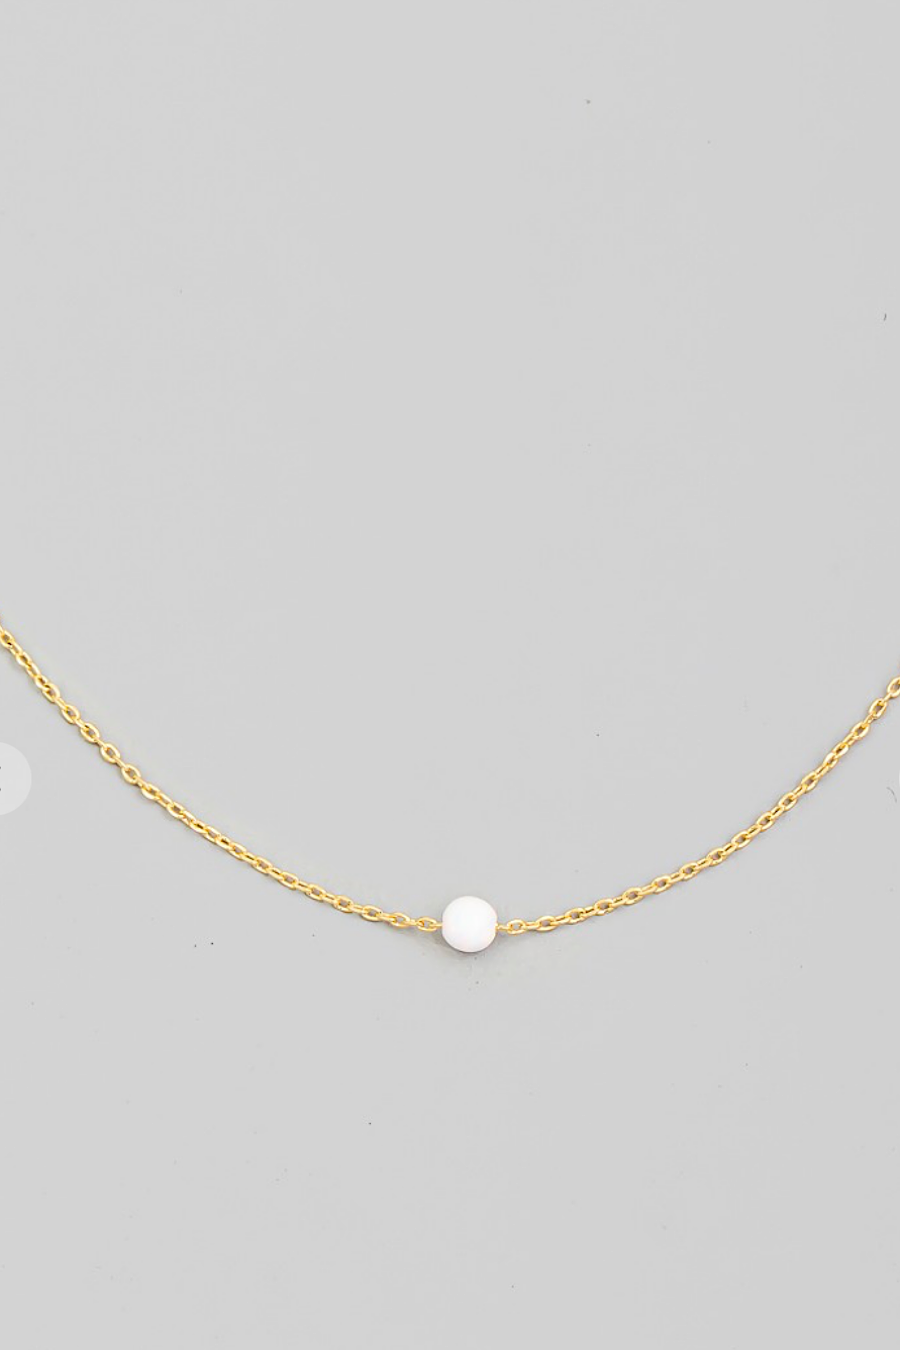 Dainty Opal Chain Necklace in Gold or Silver